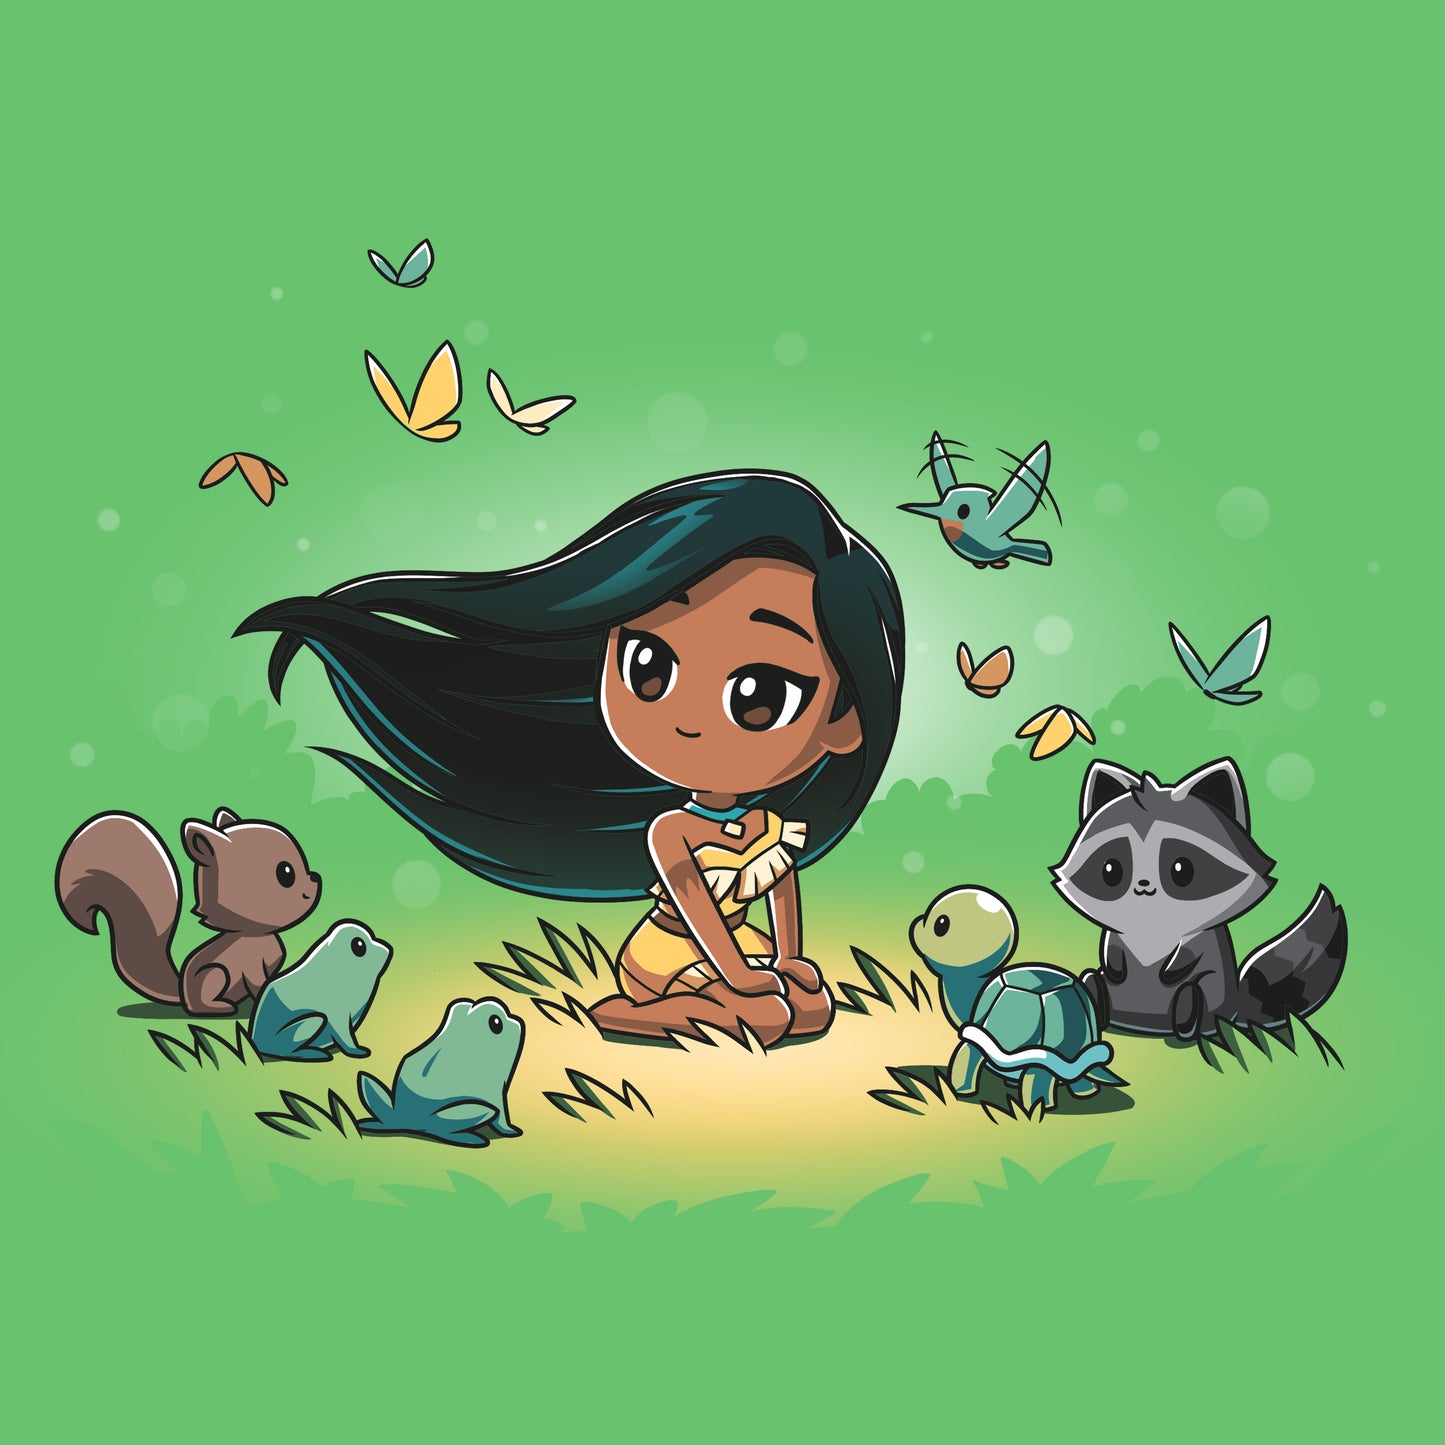 A girl officially licensed as Pocahontas sitting in the grass with Disney's Pocahontas and Her Forest Friends around her.